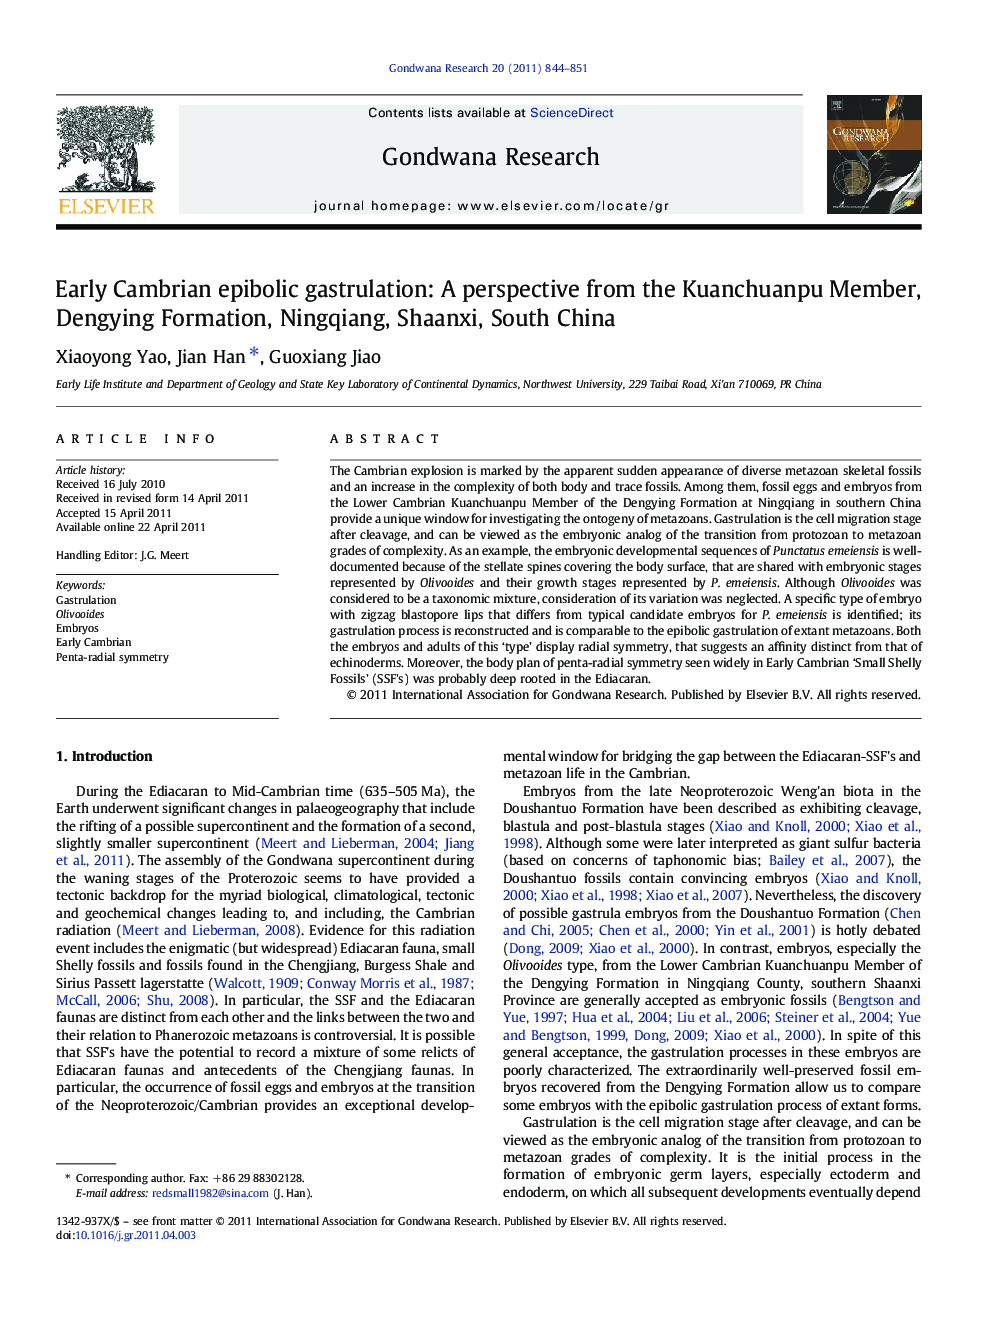 Early Cambrian epibolic gastrulation: A perspective from the Kuanchuanpu Member, Dengying Formation, Ningqiang, Shaanxi, South China